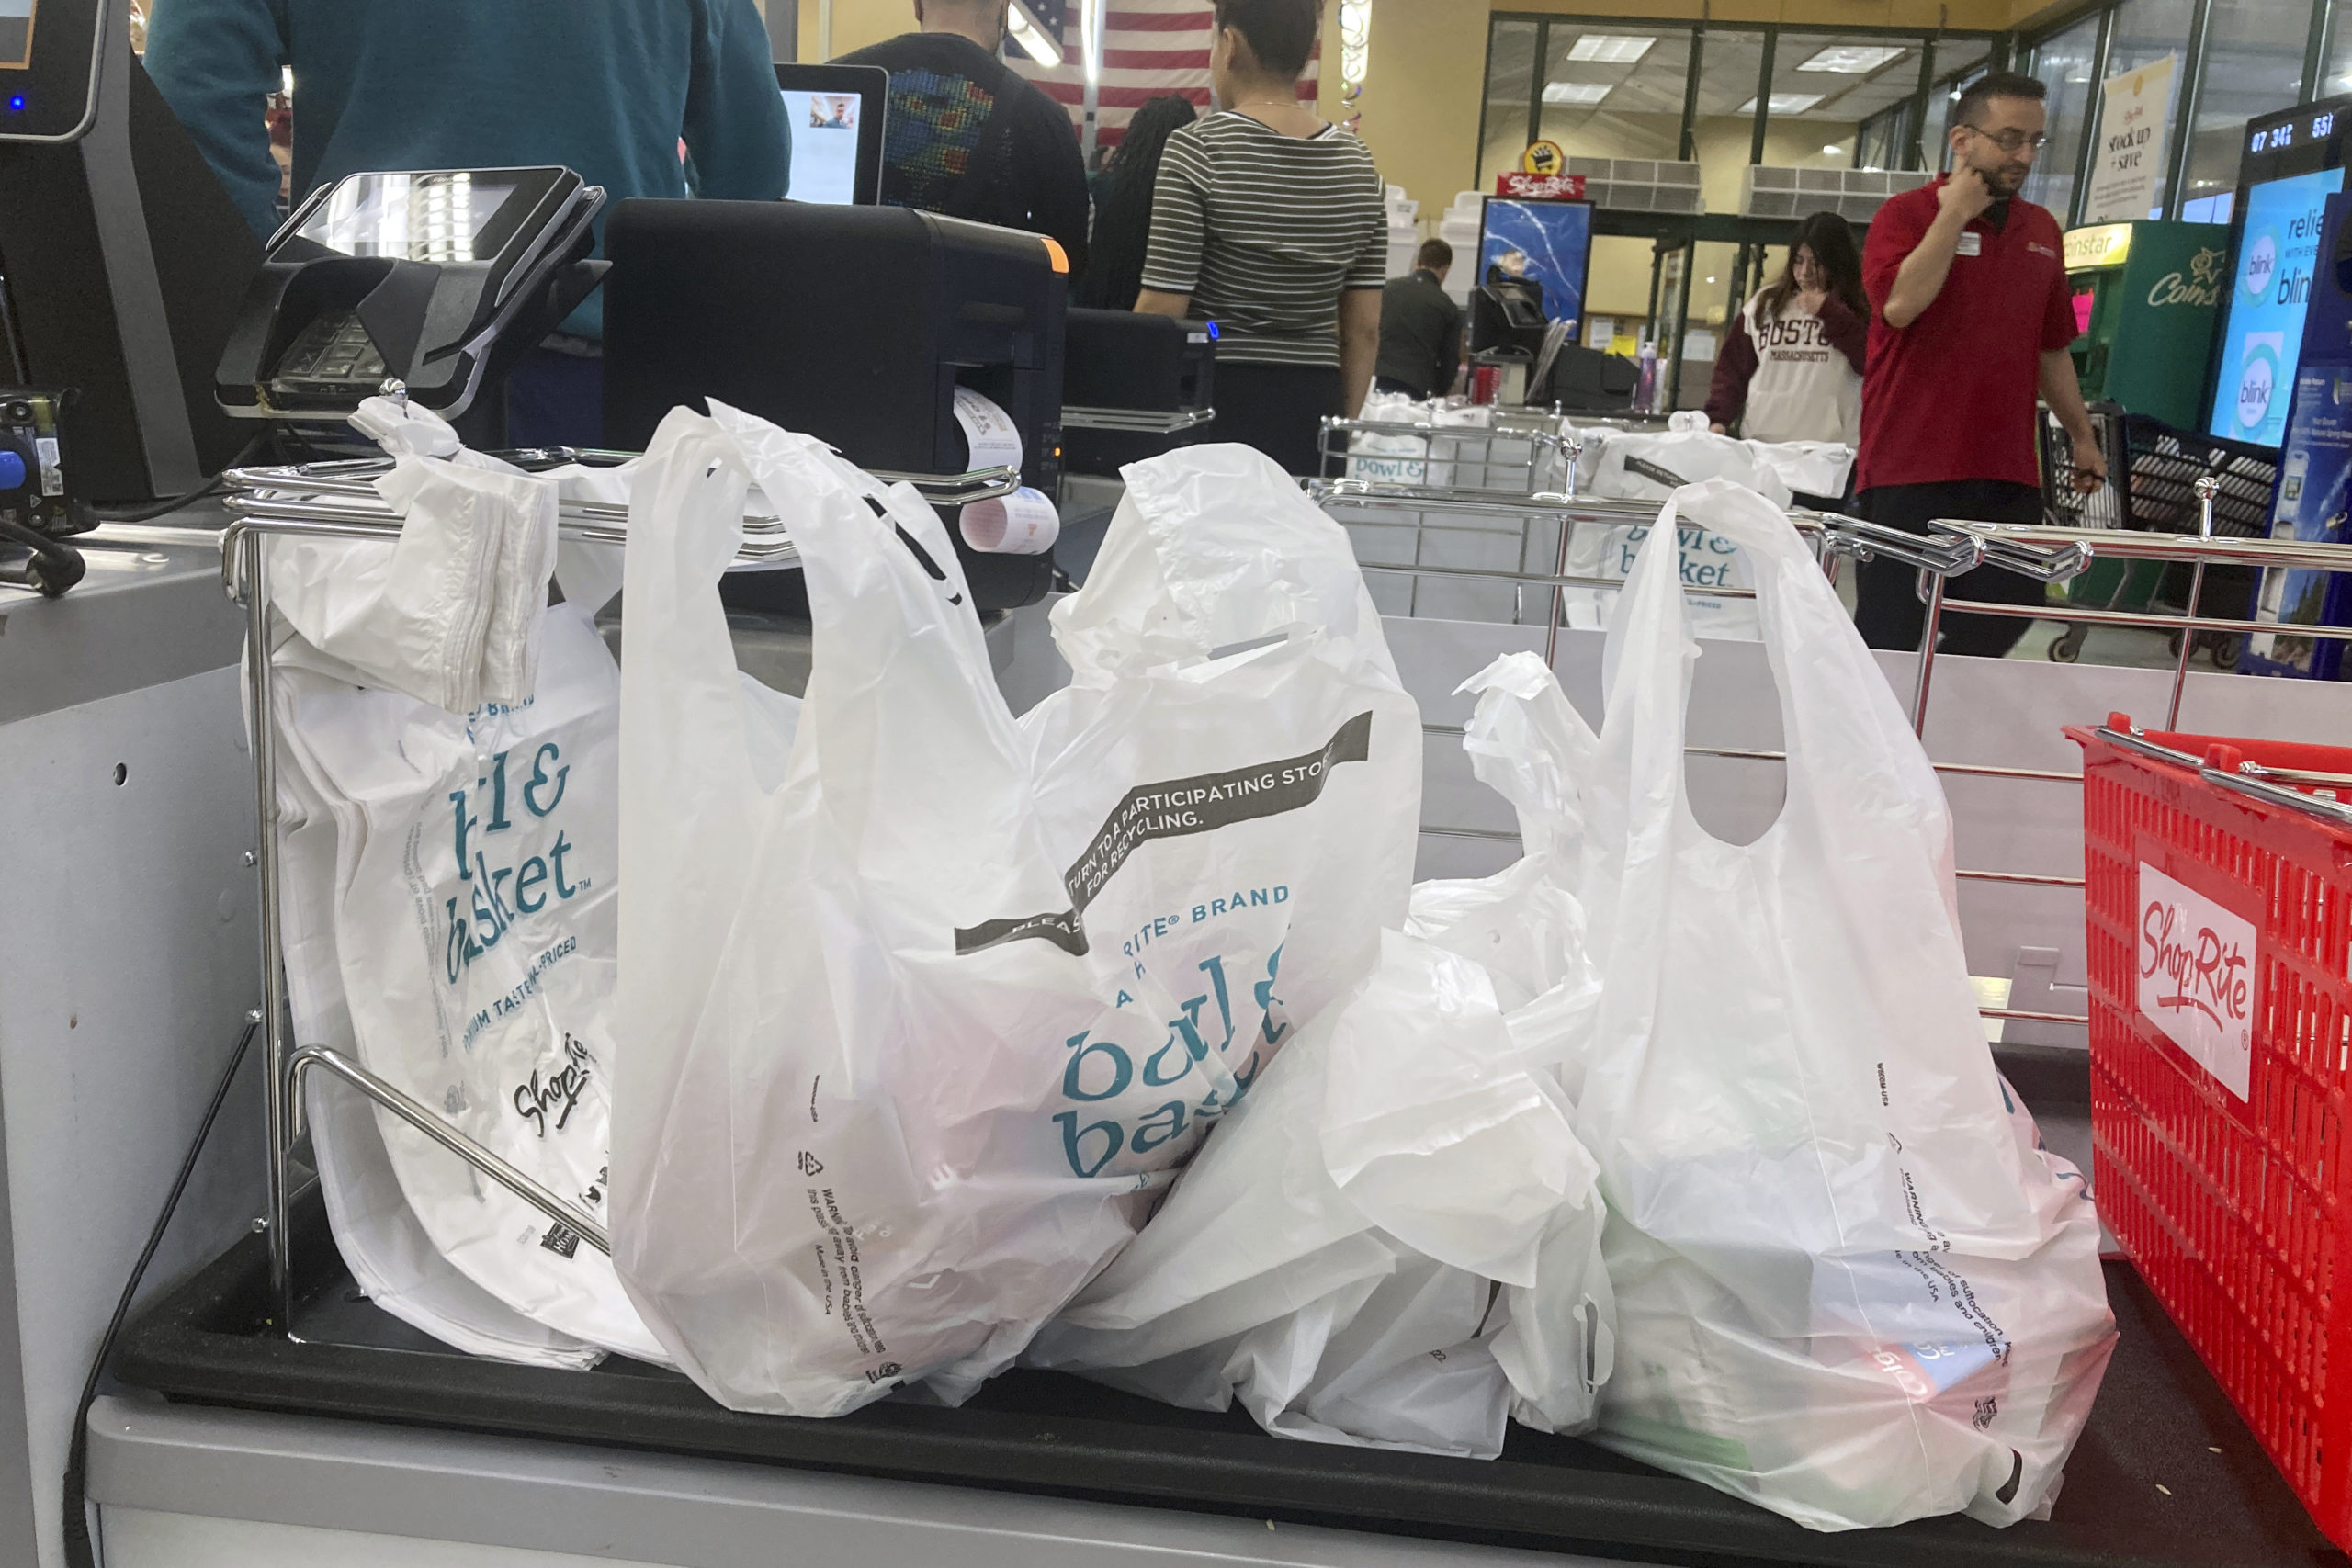 It's hard to avoid plastic while grocery shopping — even for a